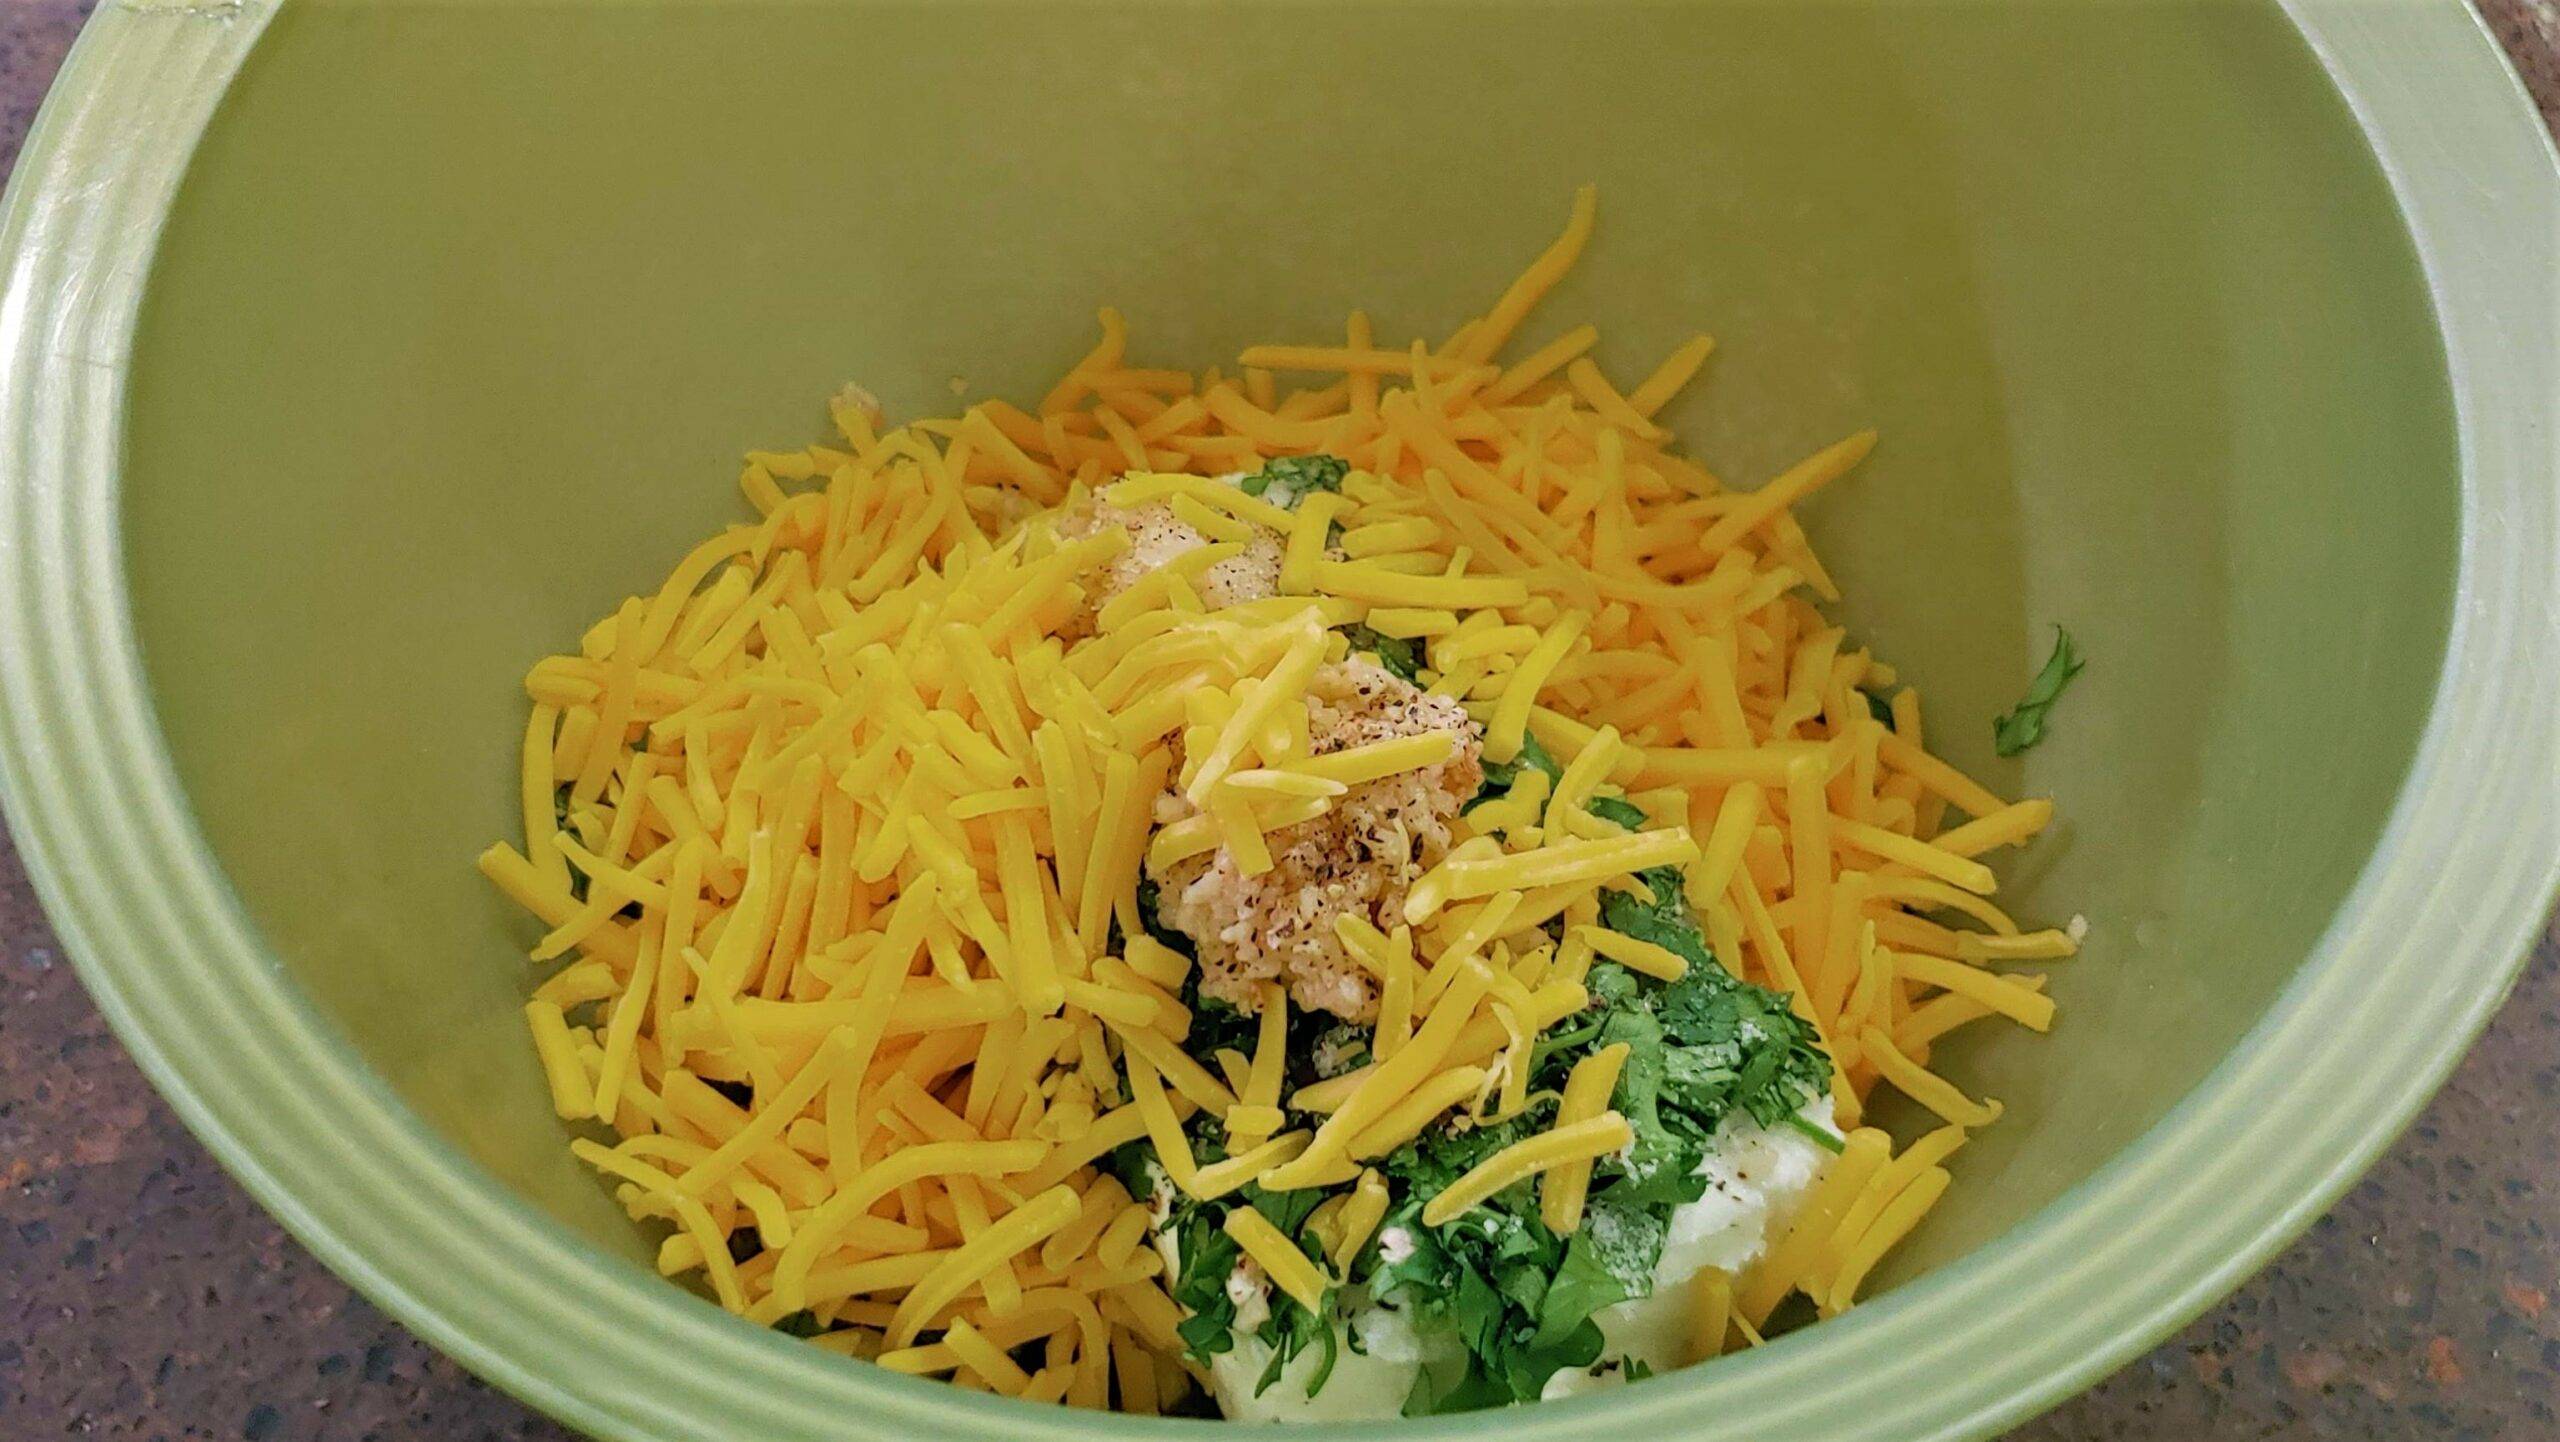 jalapeno cheese ball - Dining in with Danielle